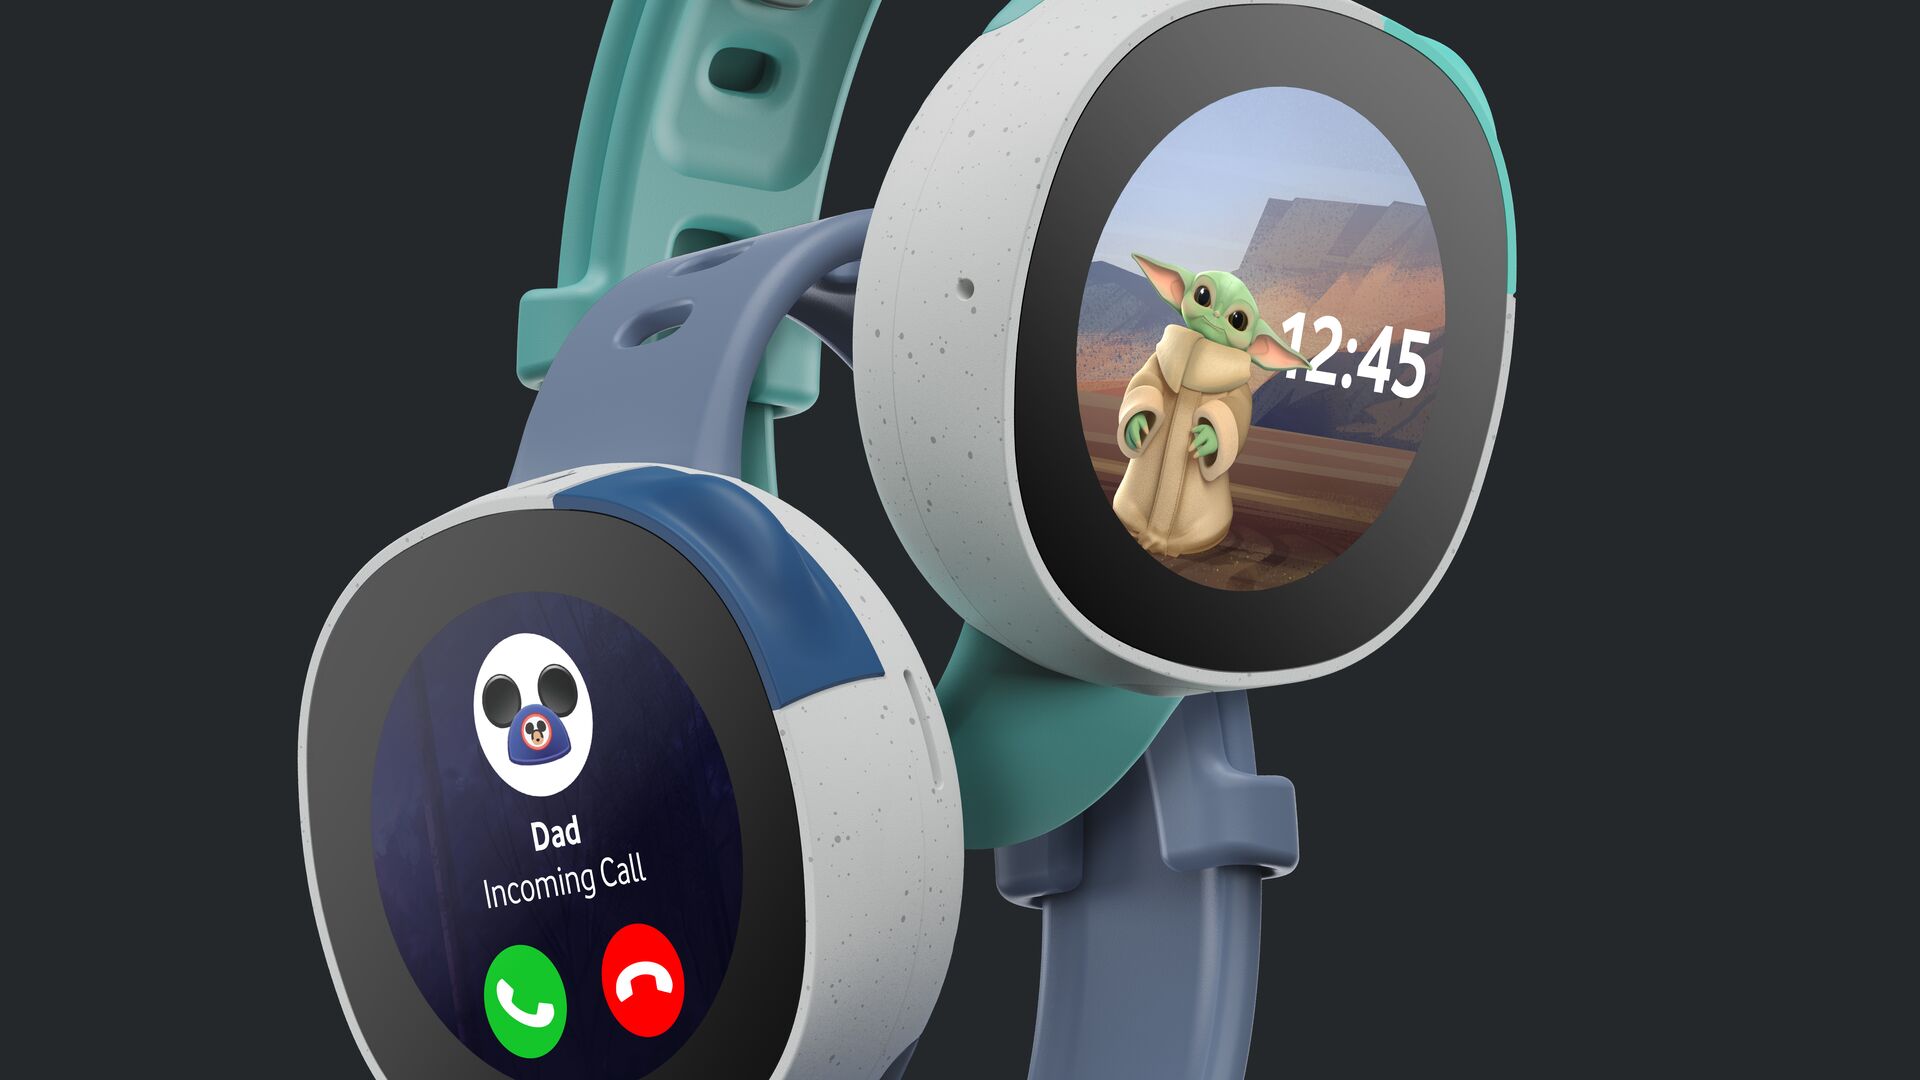 image of the Vodafone Disney Neo smartwatch receiving a call